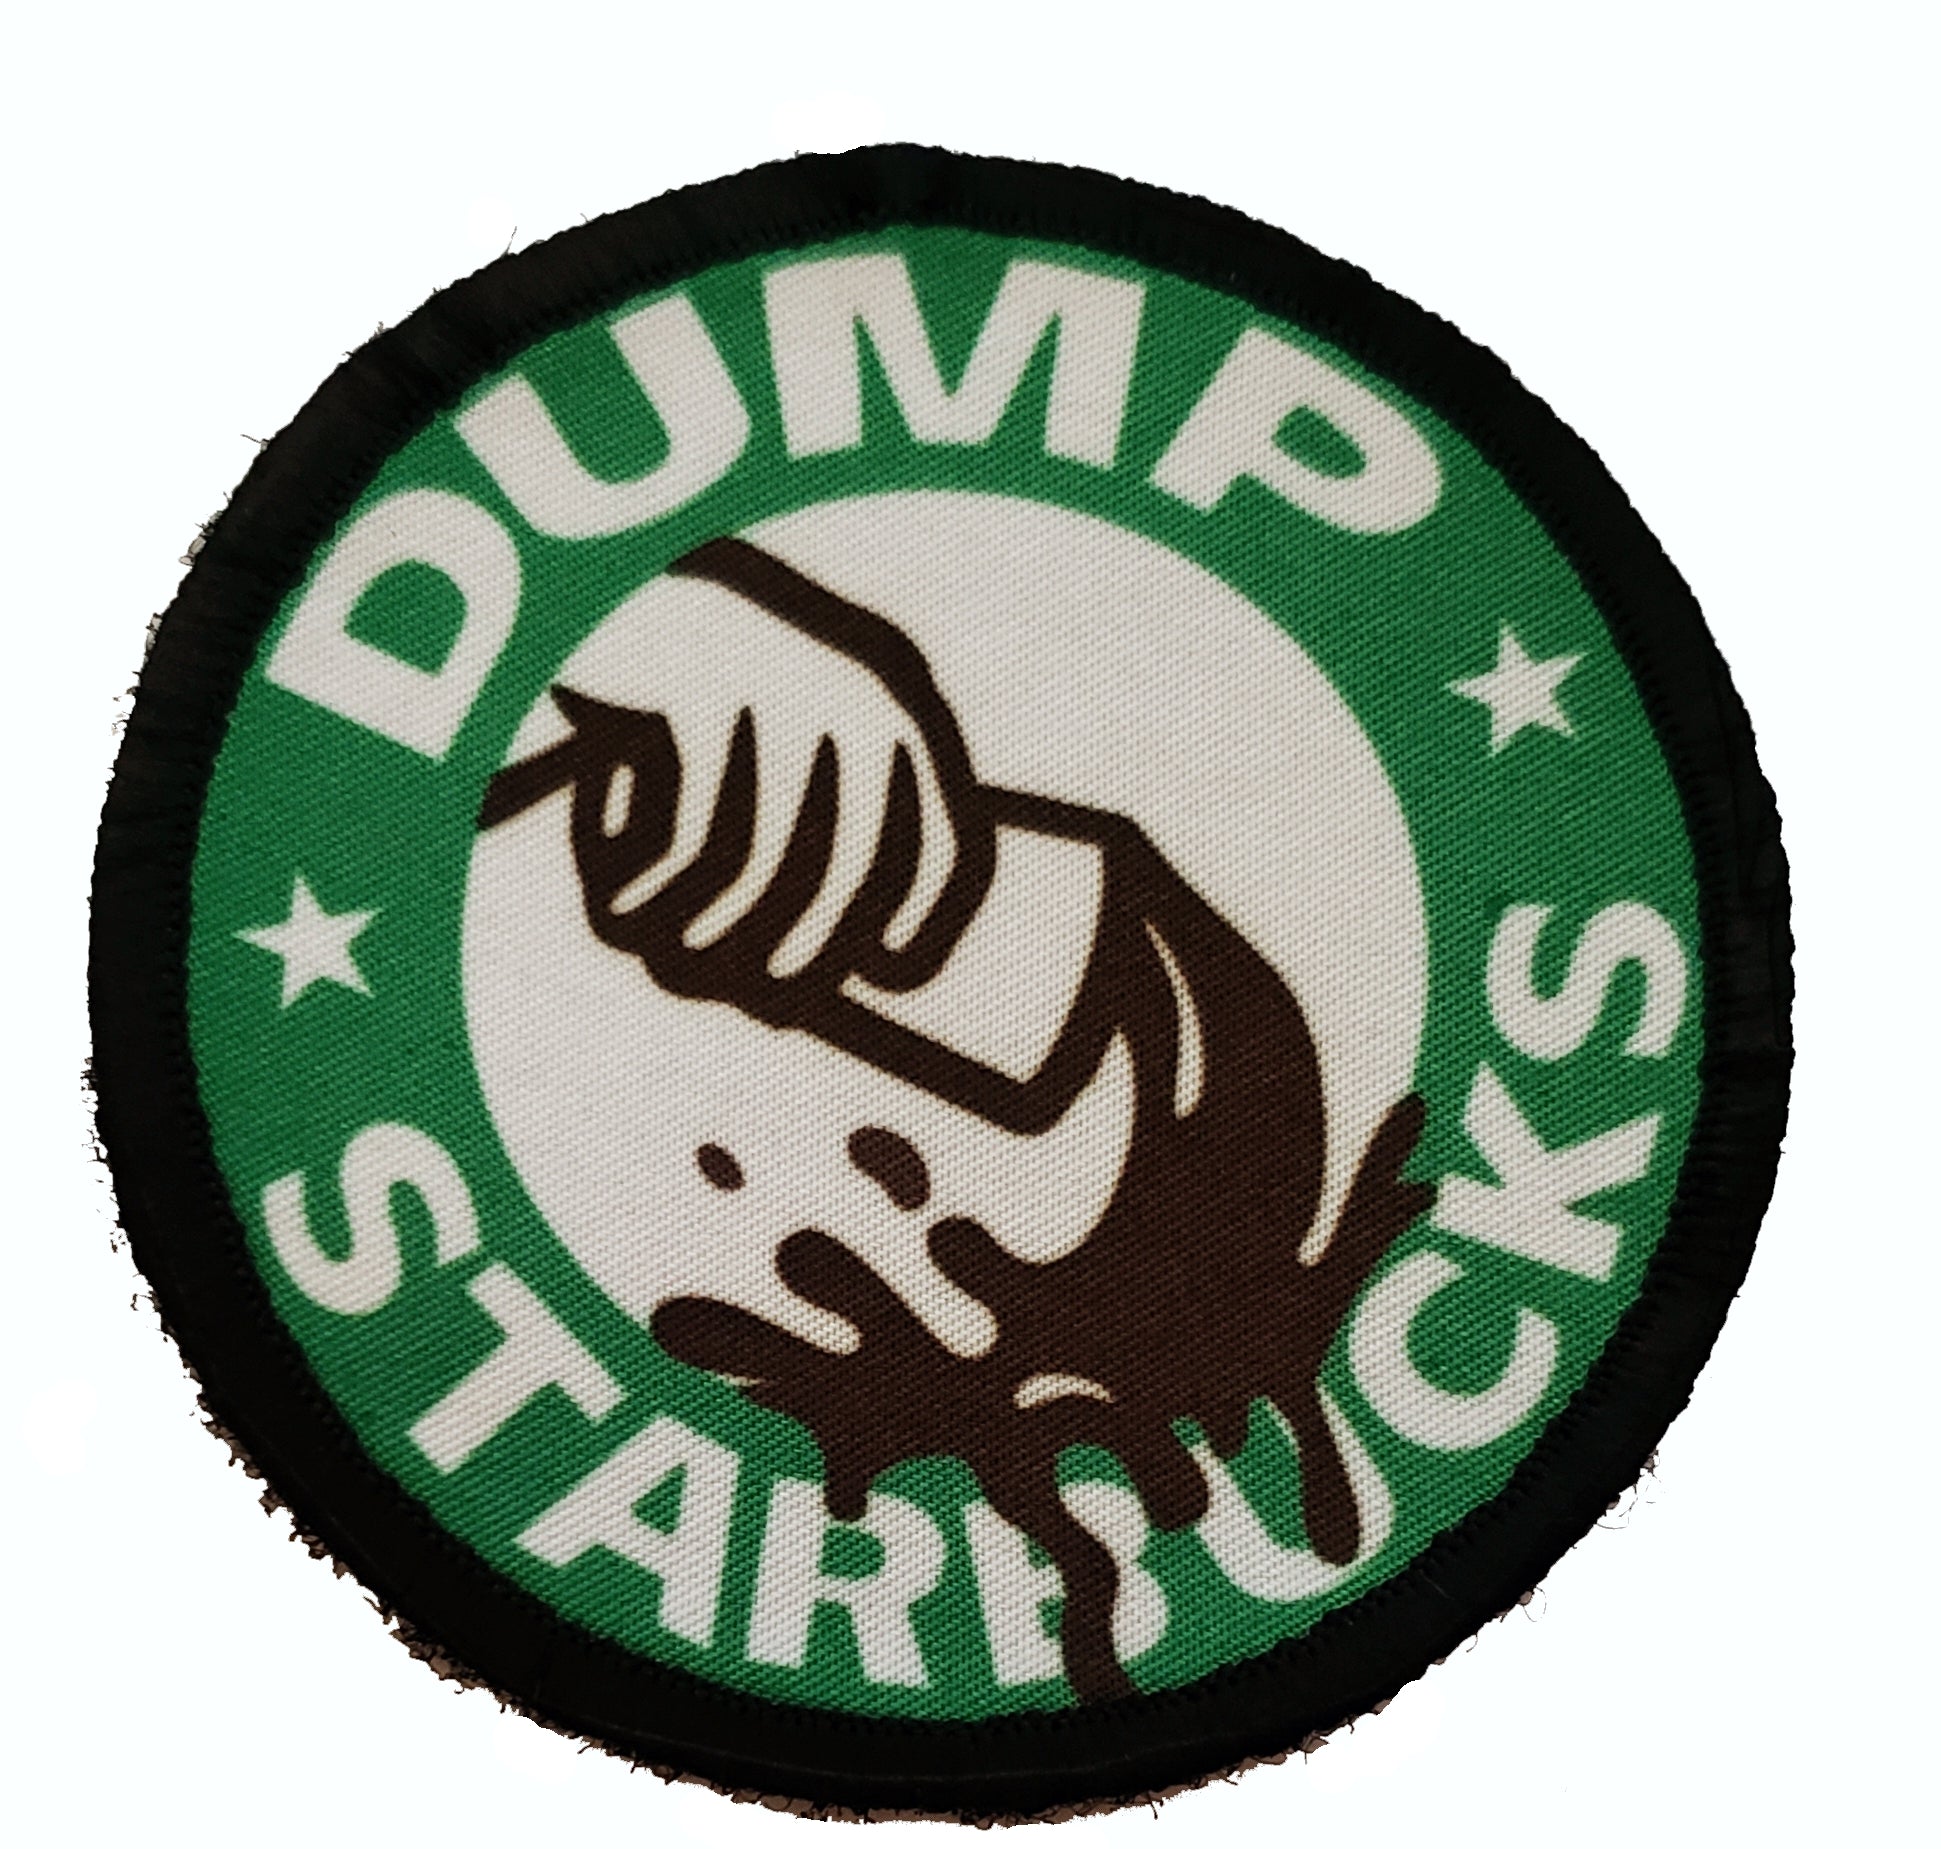 Dump Starbucks Morale Patch Morale Patches Redheaded T Shirts 